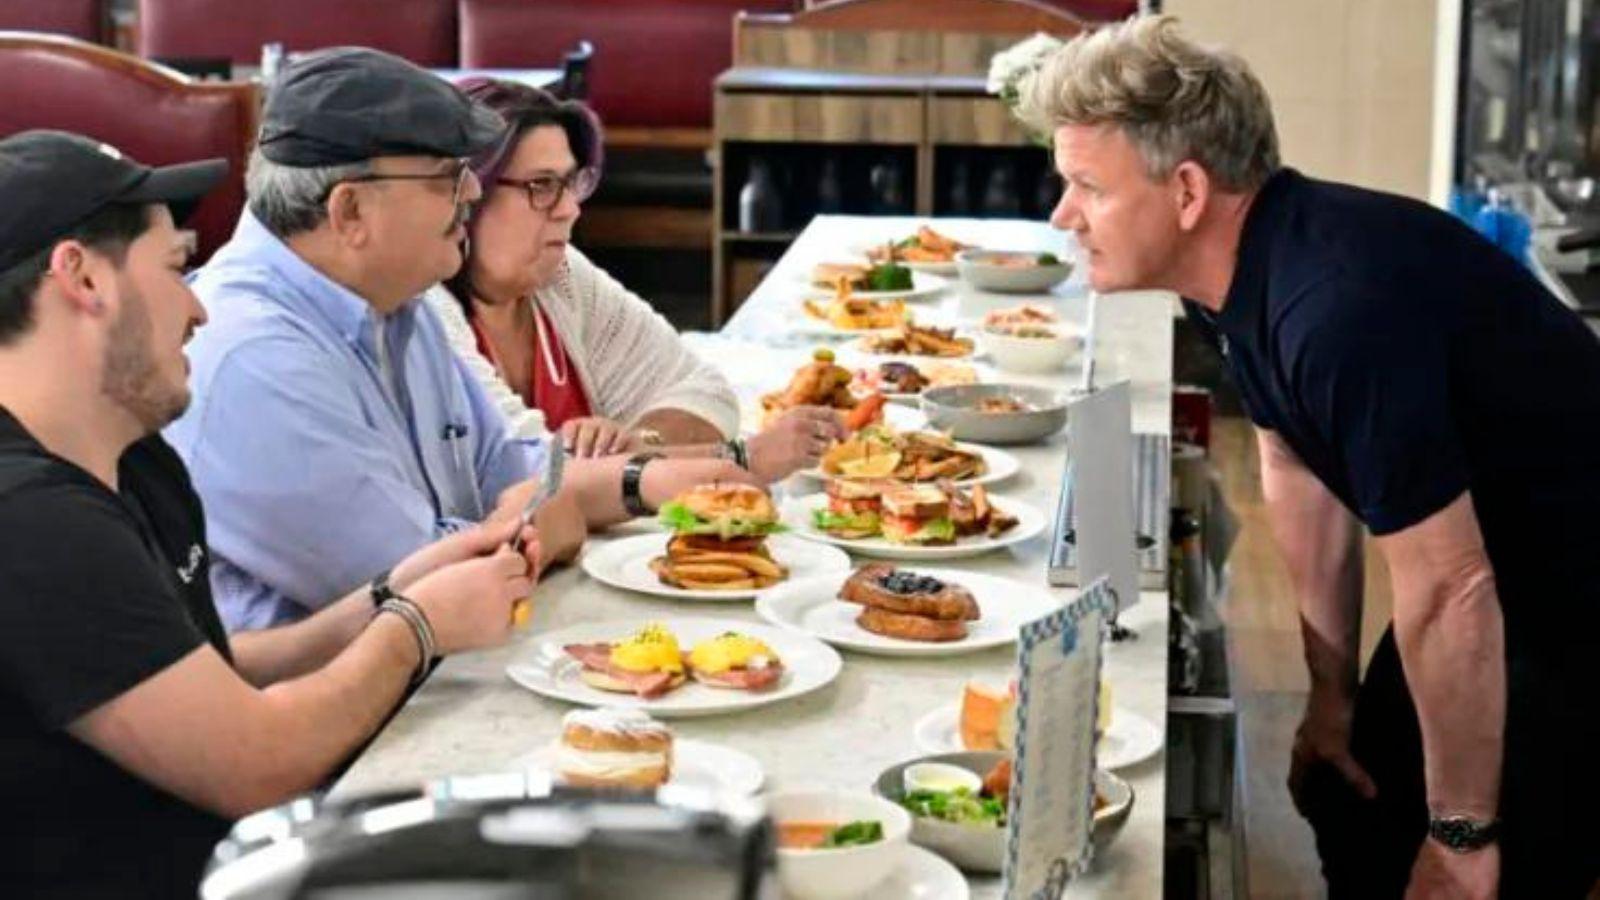 Bel Aire Diner from Kitchen Nightmares